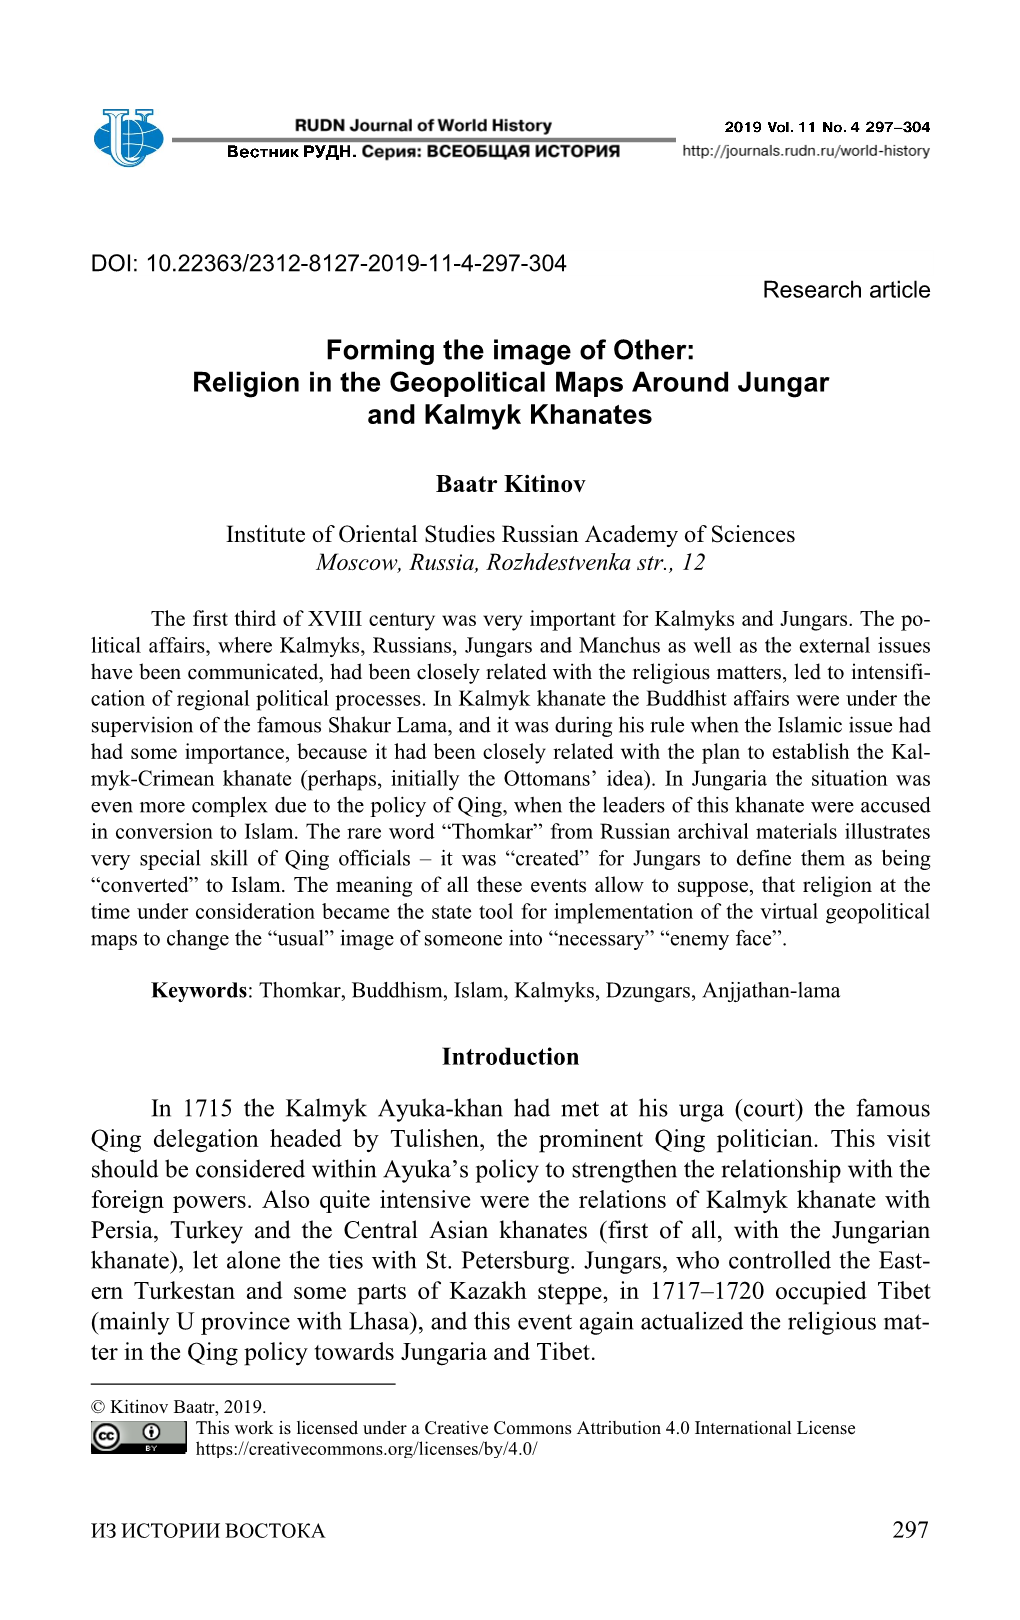 Forming the Image of Other: Religion in the Geopolitical Maps Around Jungar